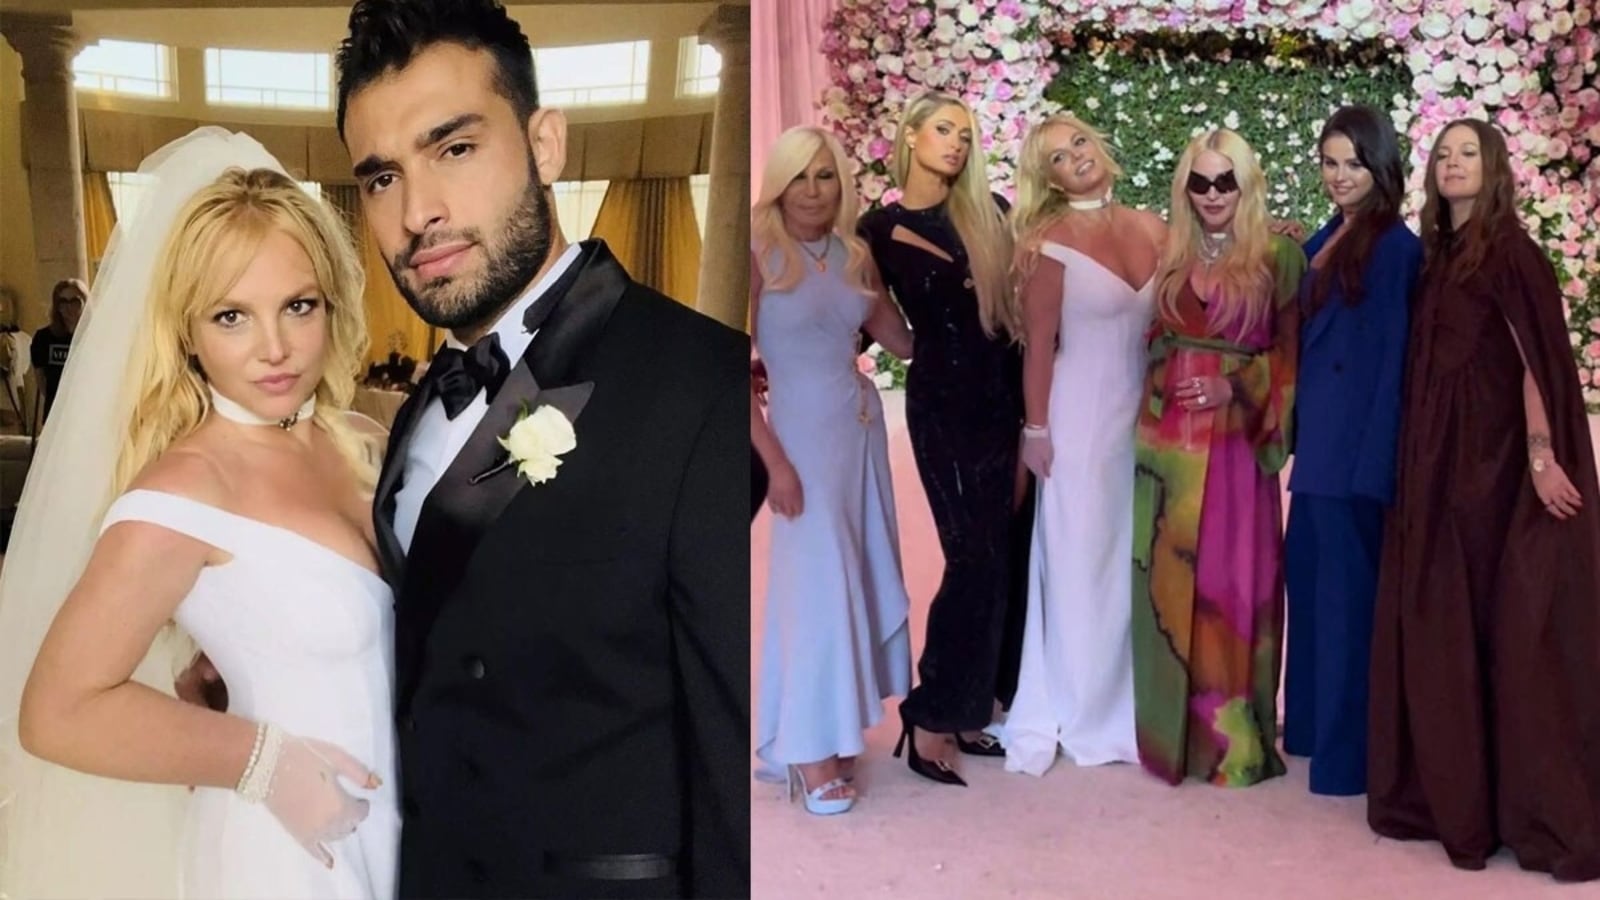 Britney Spears kisses Madonna again, grooves with Drew Barrymore and Selena Gomez at ‘dream’ wedding. See pics